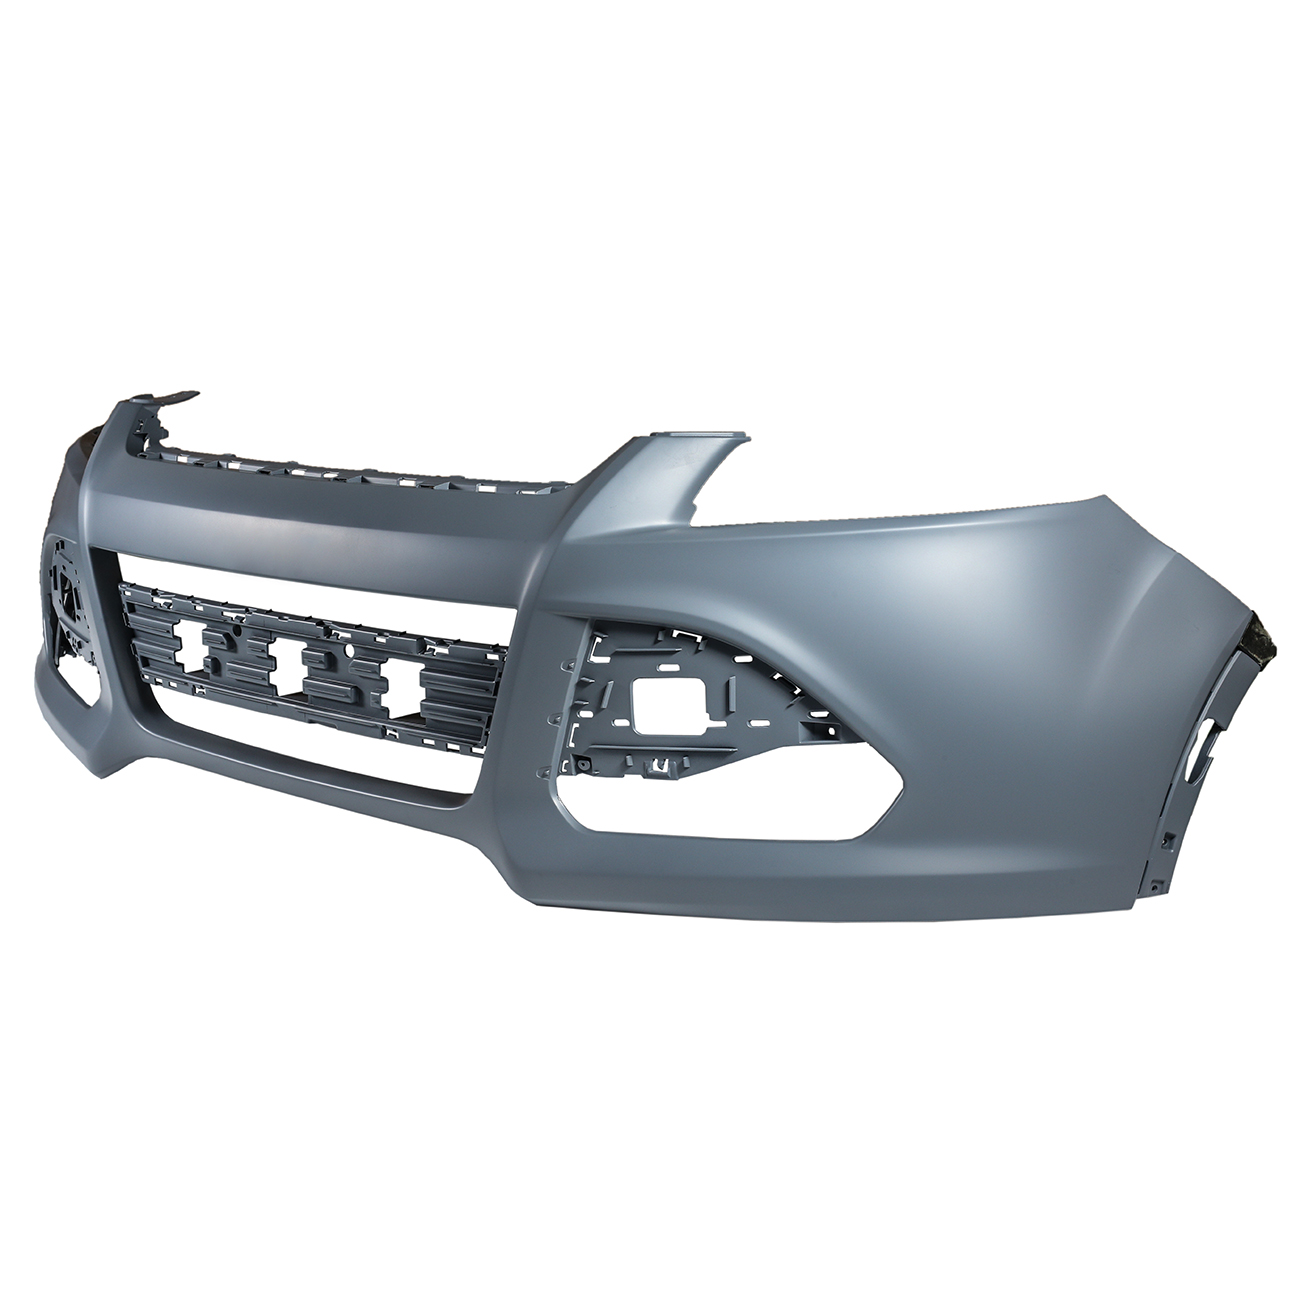 Used for kuga escape 2013 front bumper